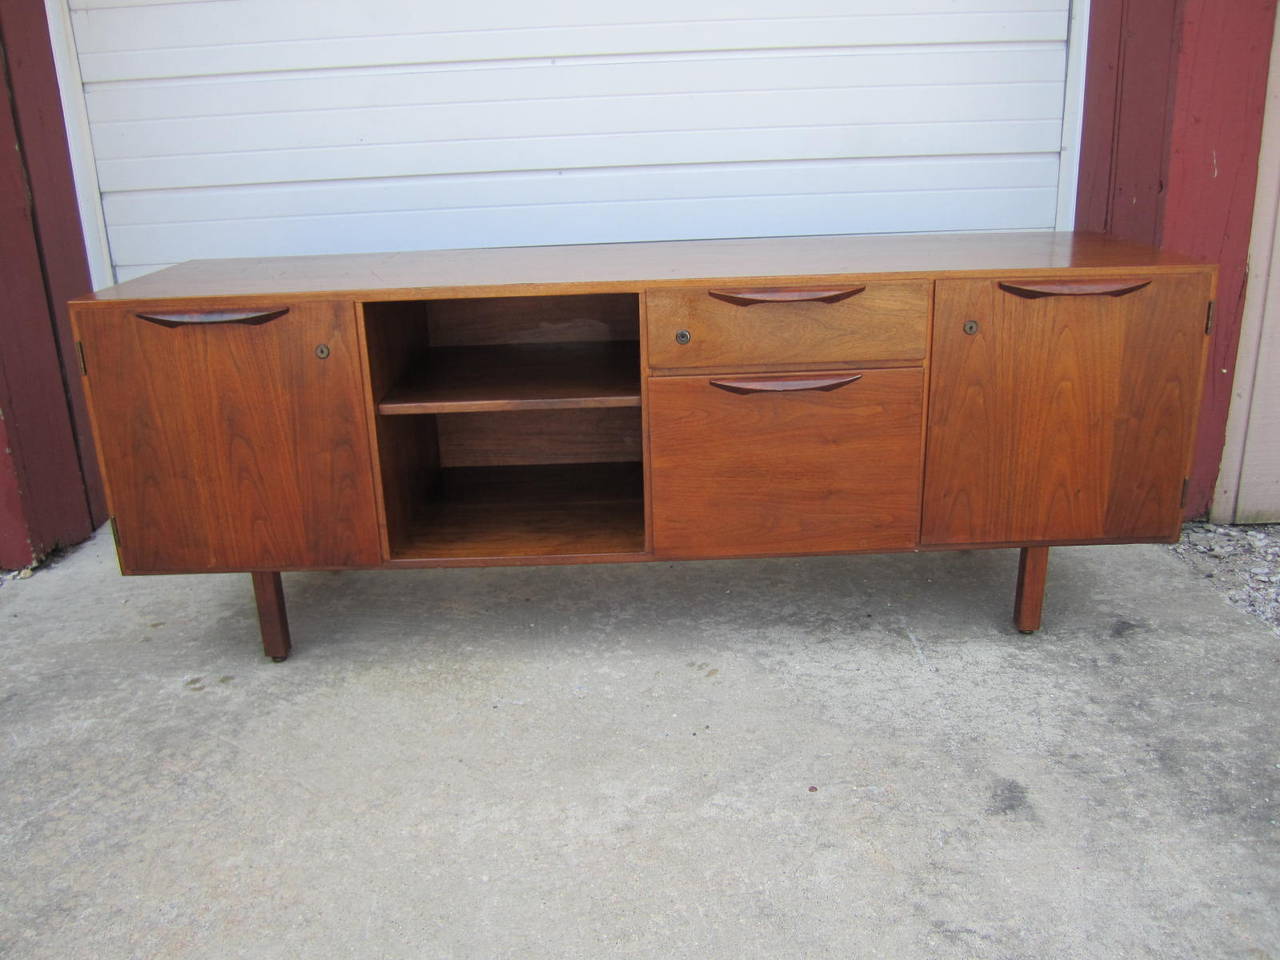 Walnut Jens Risom credenza. Two cabinet doors with an adjustable shelf inside. Also has two drawers and one open space with adjustable shelf. Credenza has a finished back. This is an awesome solid walnut cabinet / credenza designed by Jens Risom.